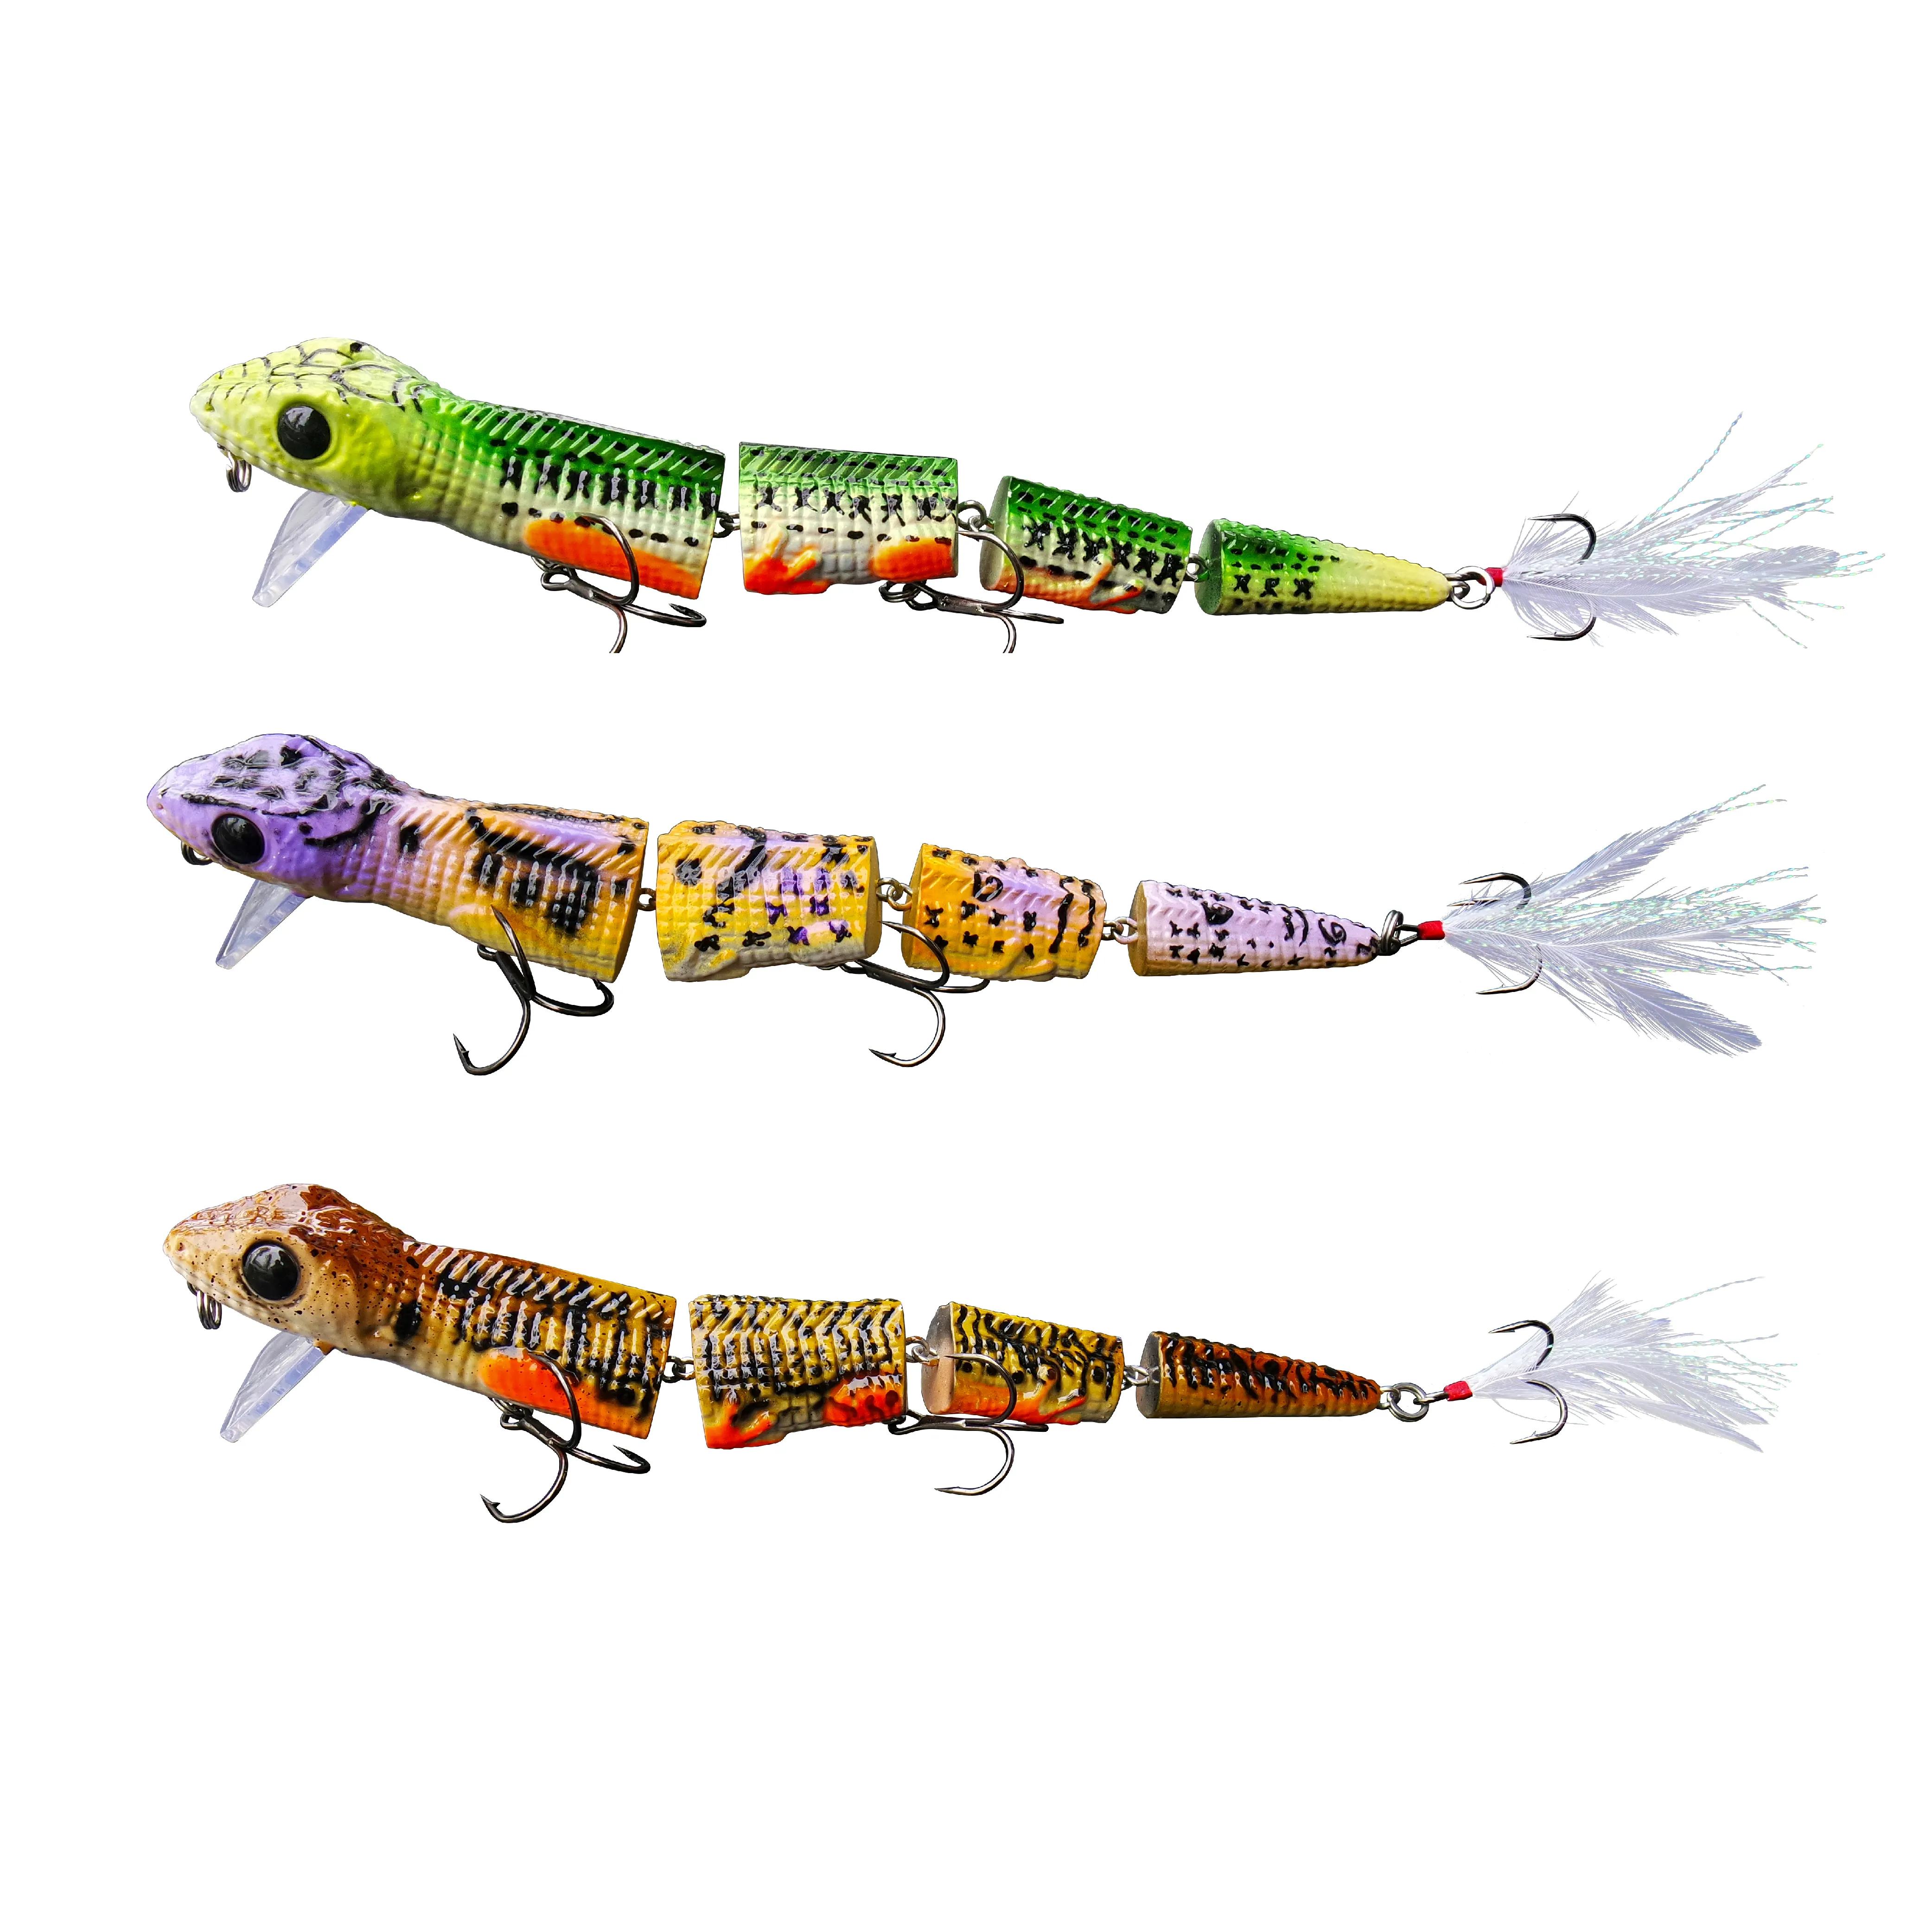 Creeping Bait up for Grabs UV Colors Lifelike Lizard Lure Large Multi Jointed Swimbait Inventory Wholesale Big Game Fishing Lure